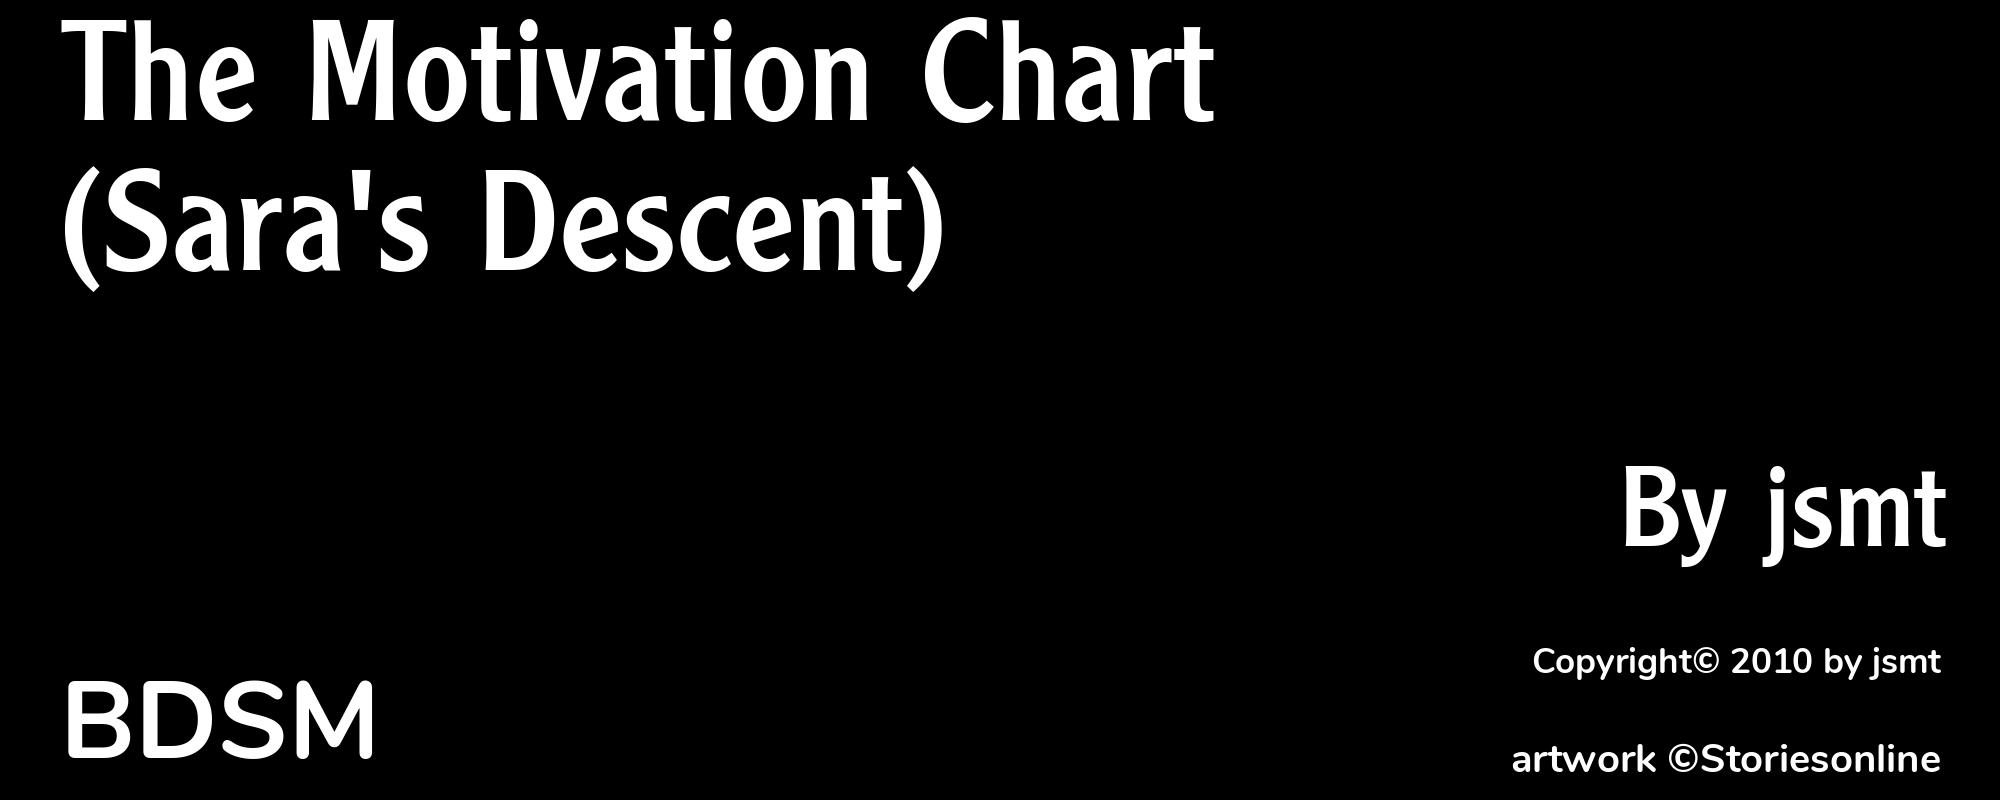 The Motivation Chart (Sara's Descent) - Cover